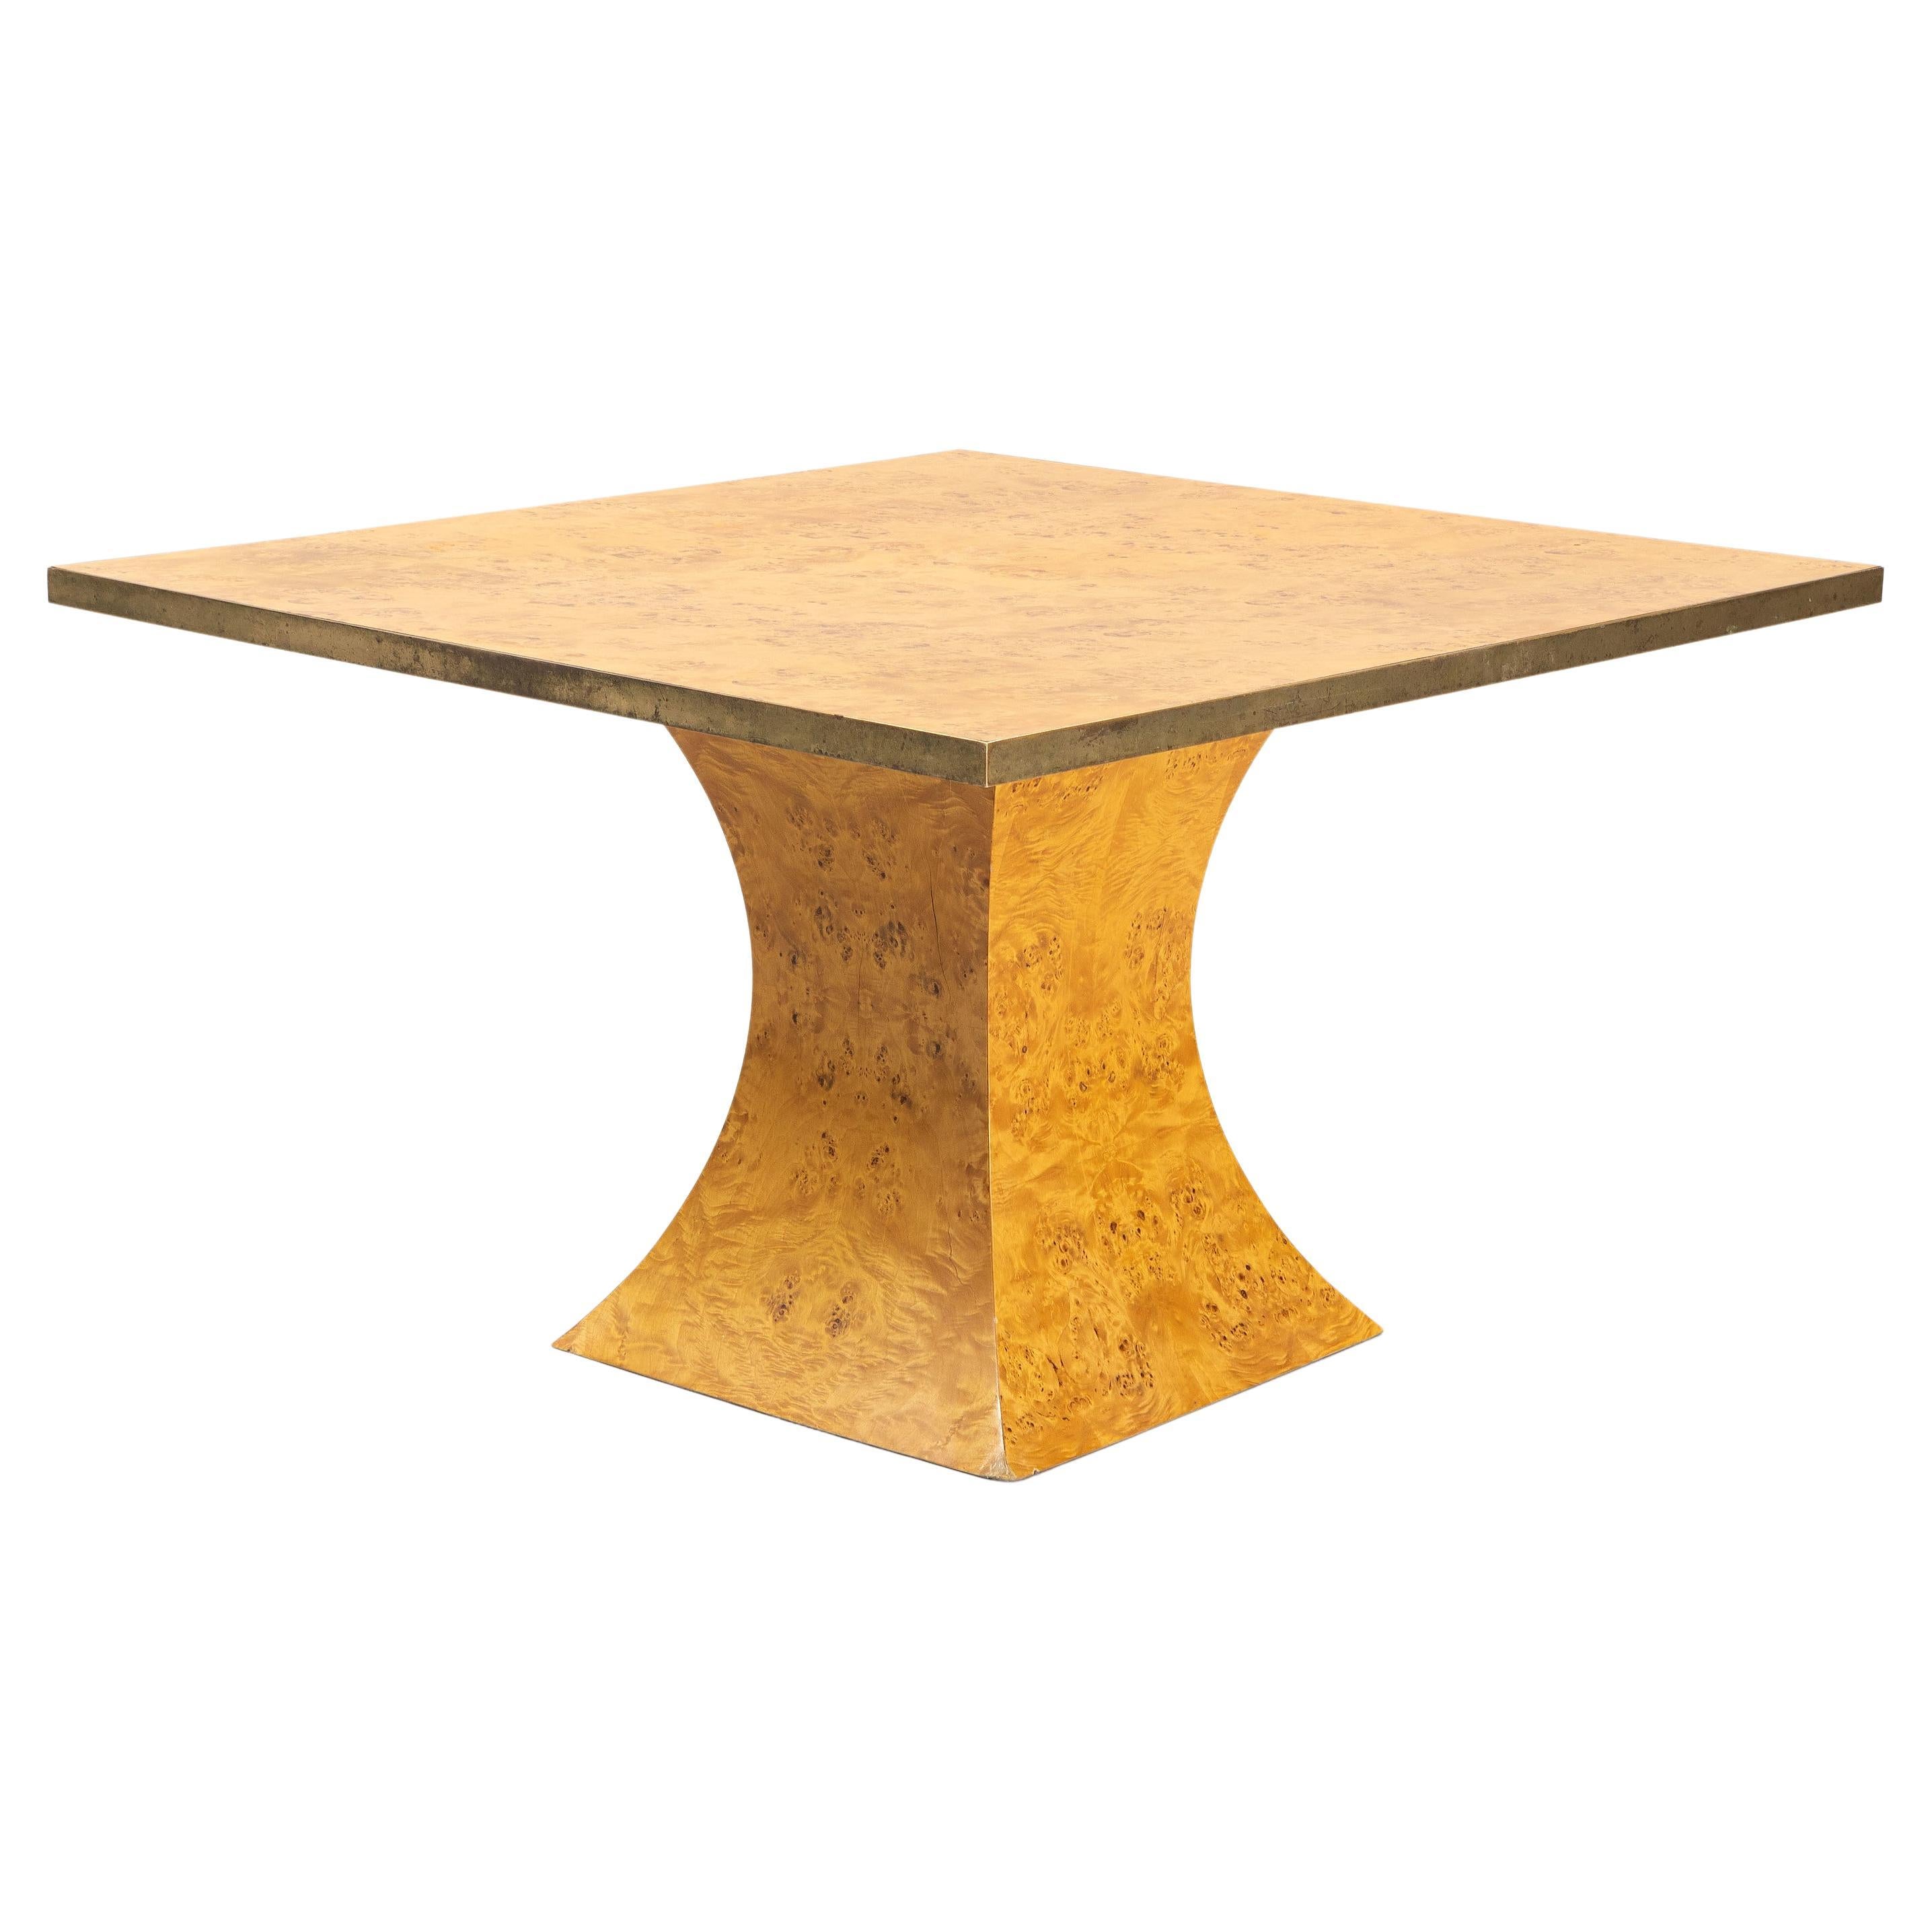 Willy Rizzo Dining Table in Burl & Brass, "Savage", Italian Modern, Made 1970s